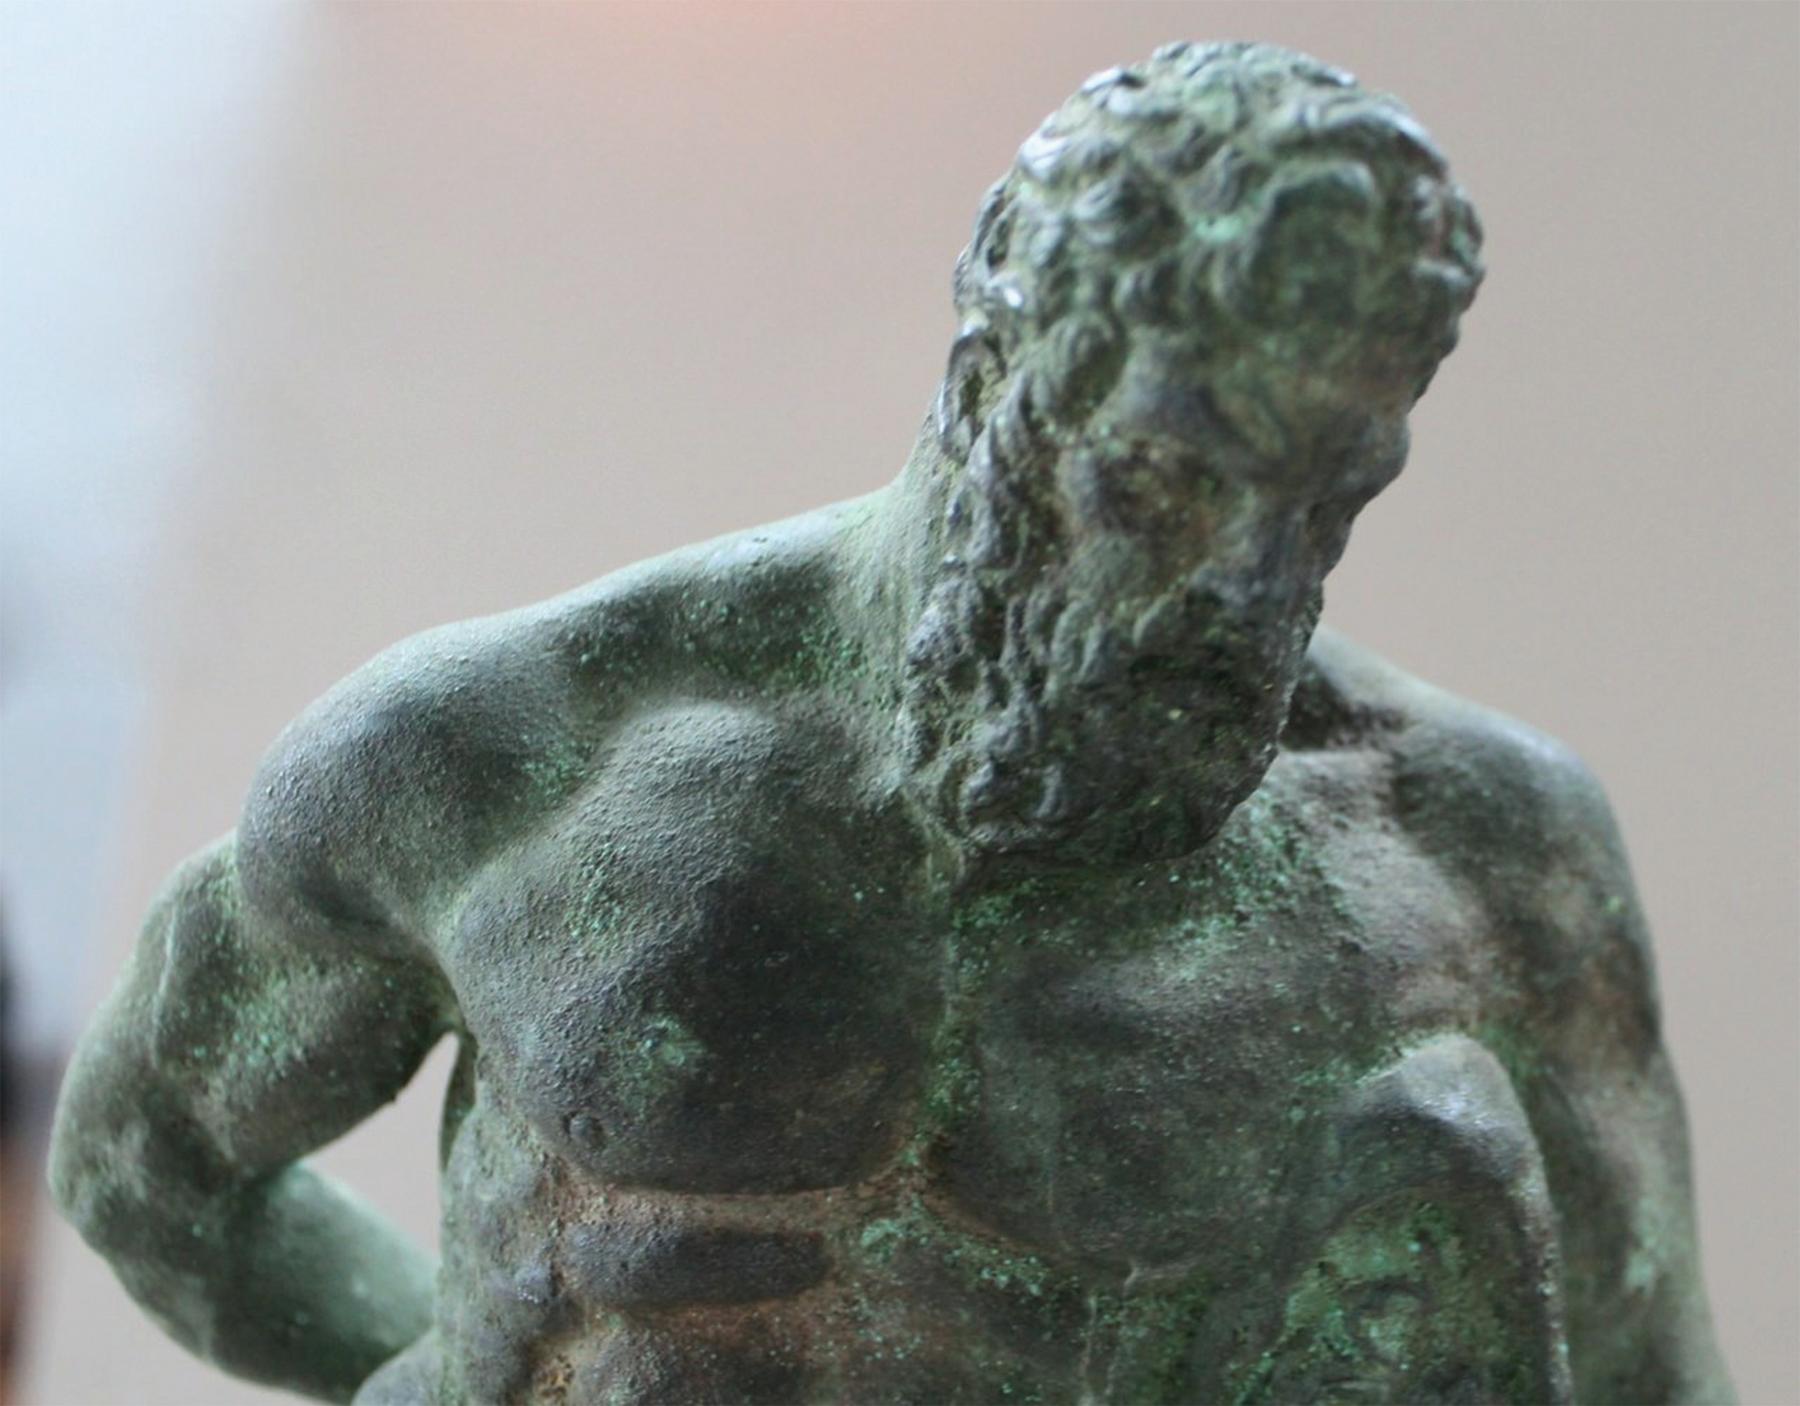 Late 18th Century Bronze Sculpture after the Farnese Hercules
Grand Tour bronze with a fine encrusted patination on a later wooden base
16 in. h., overall
12.5 in. h., bronze 
3.5 in. h., base

The Farnese Hercules is an ancient statue of Hercules,